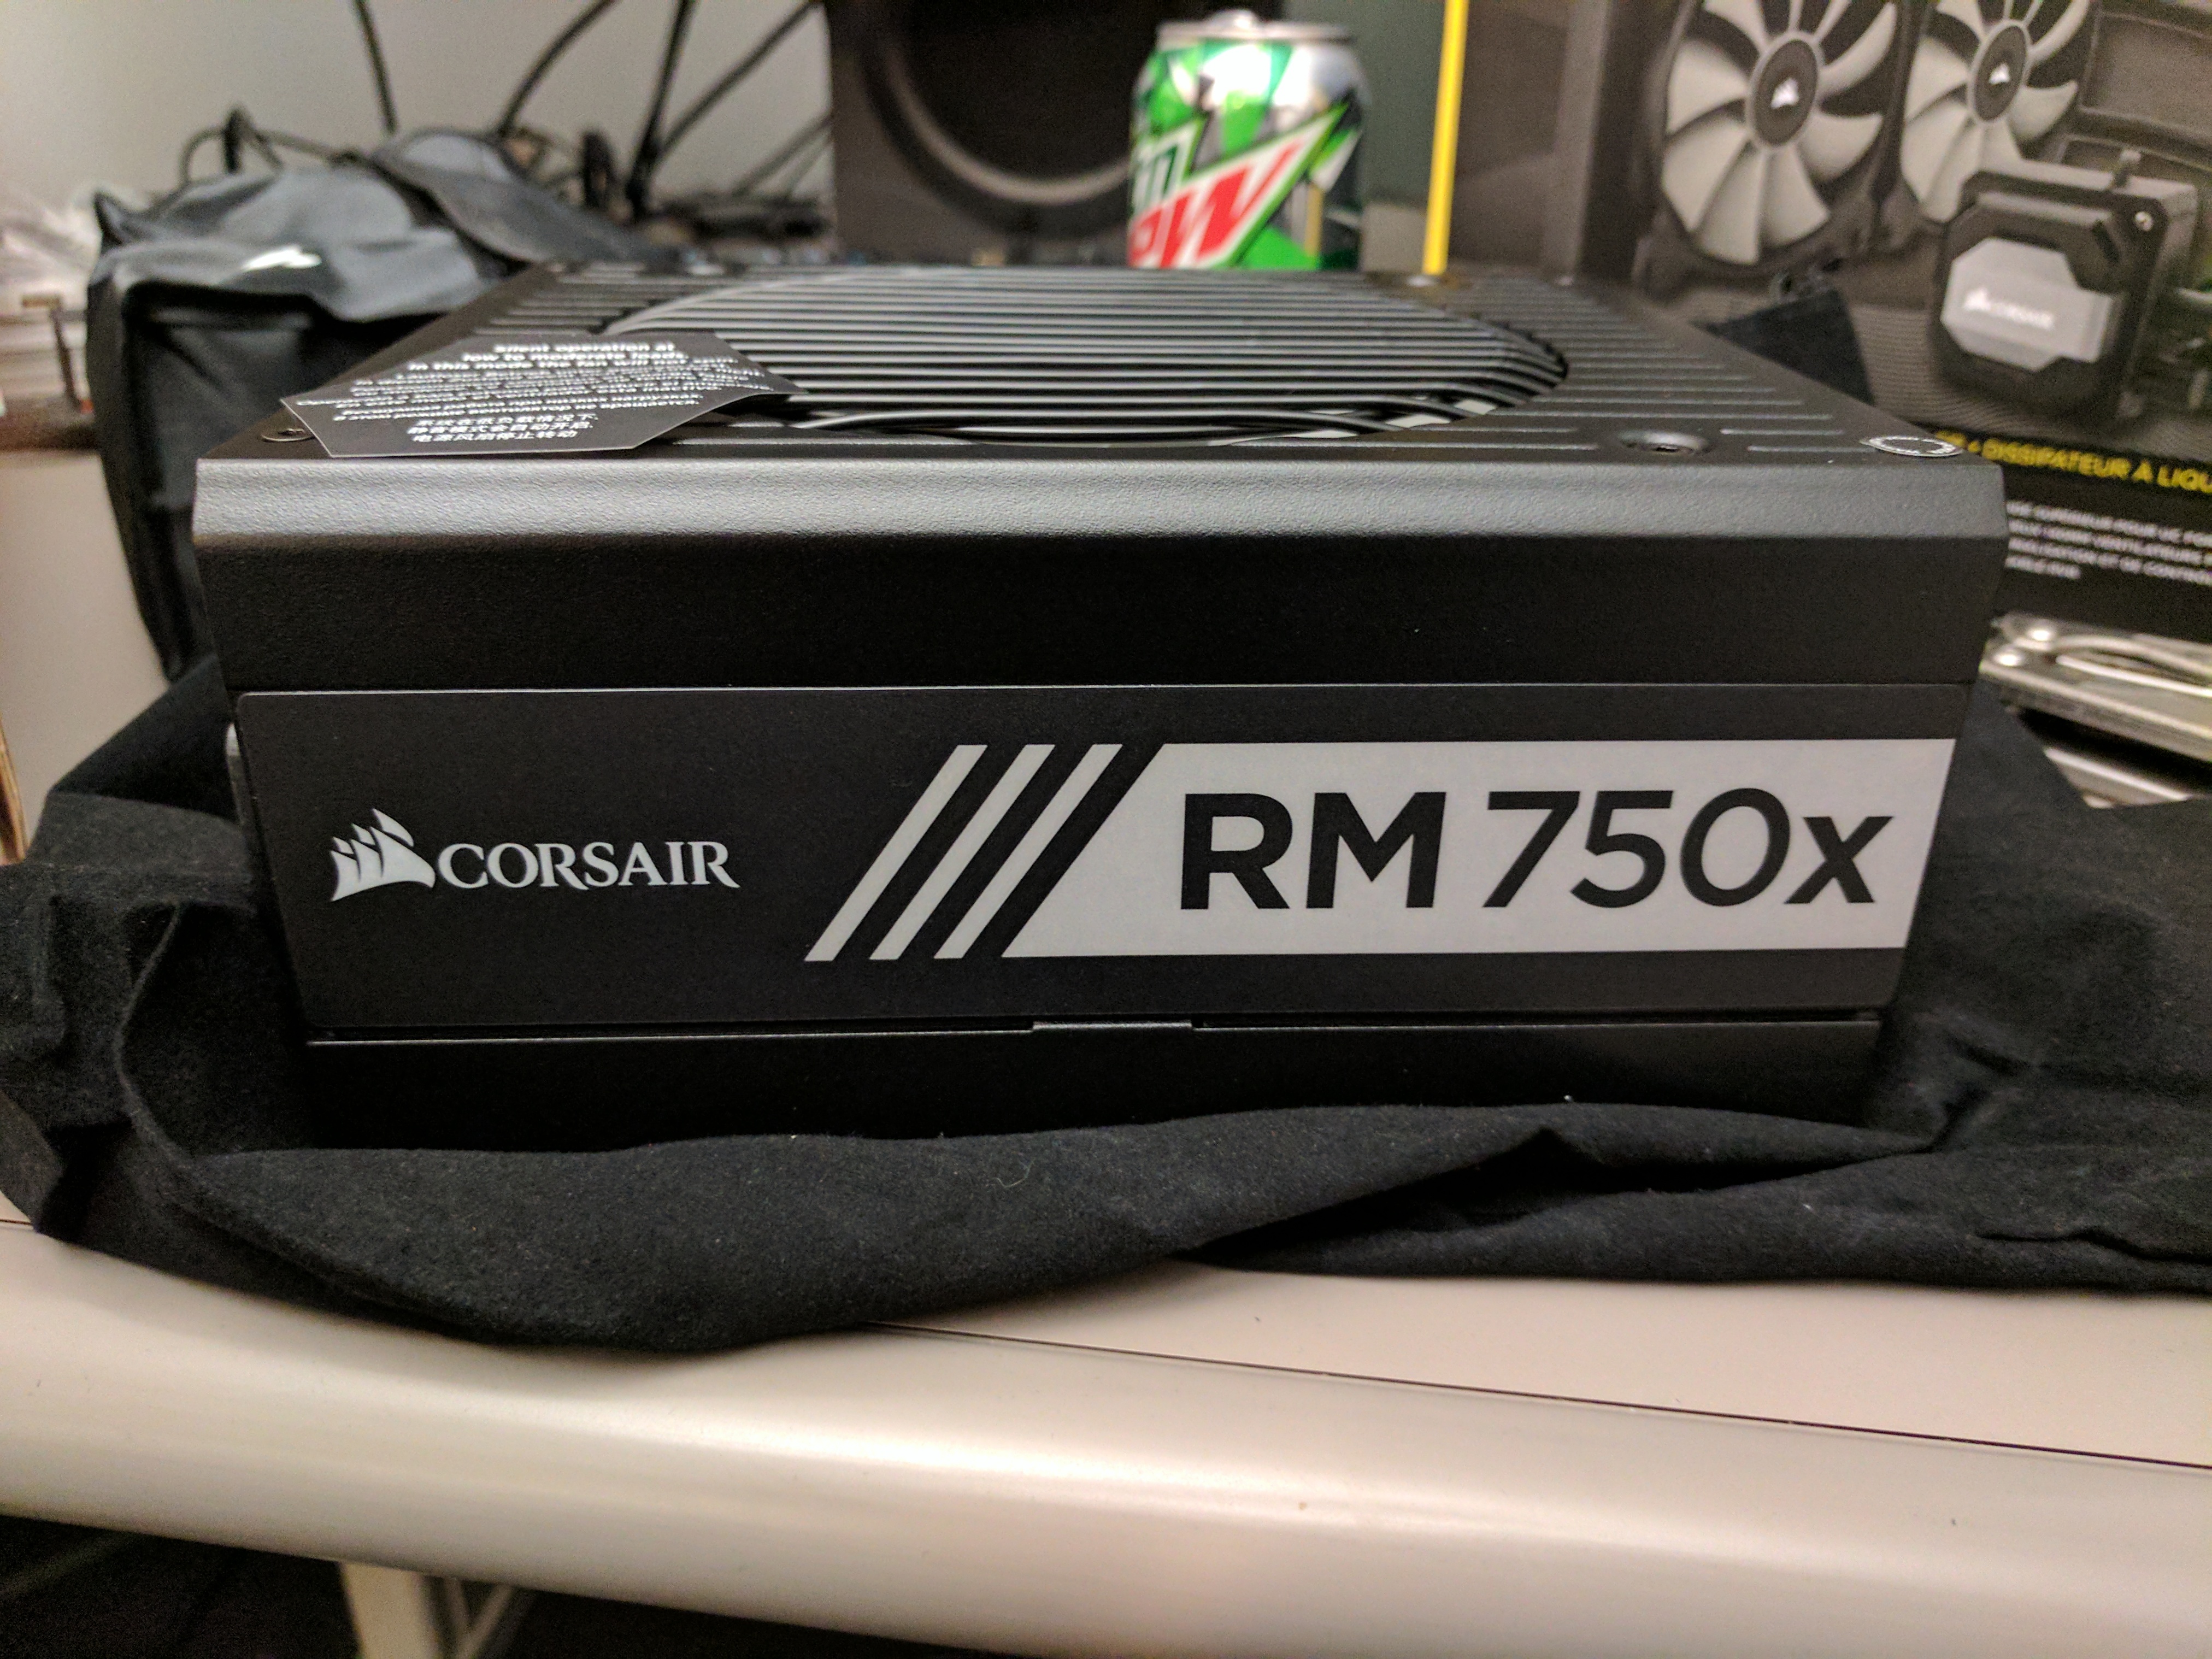 Next in: the Corsair RM 750X Power Supply.